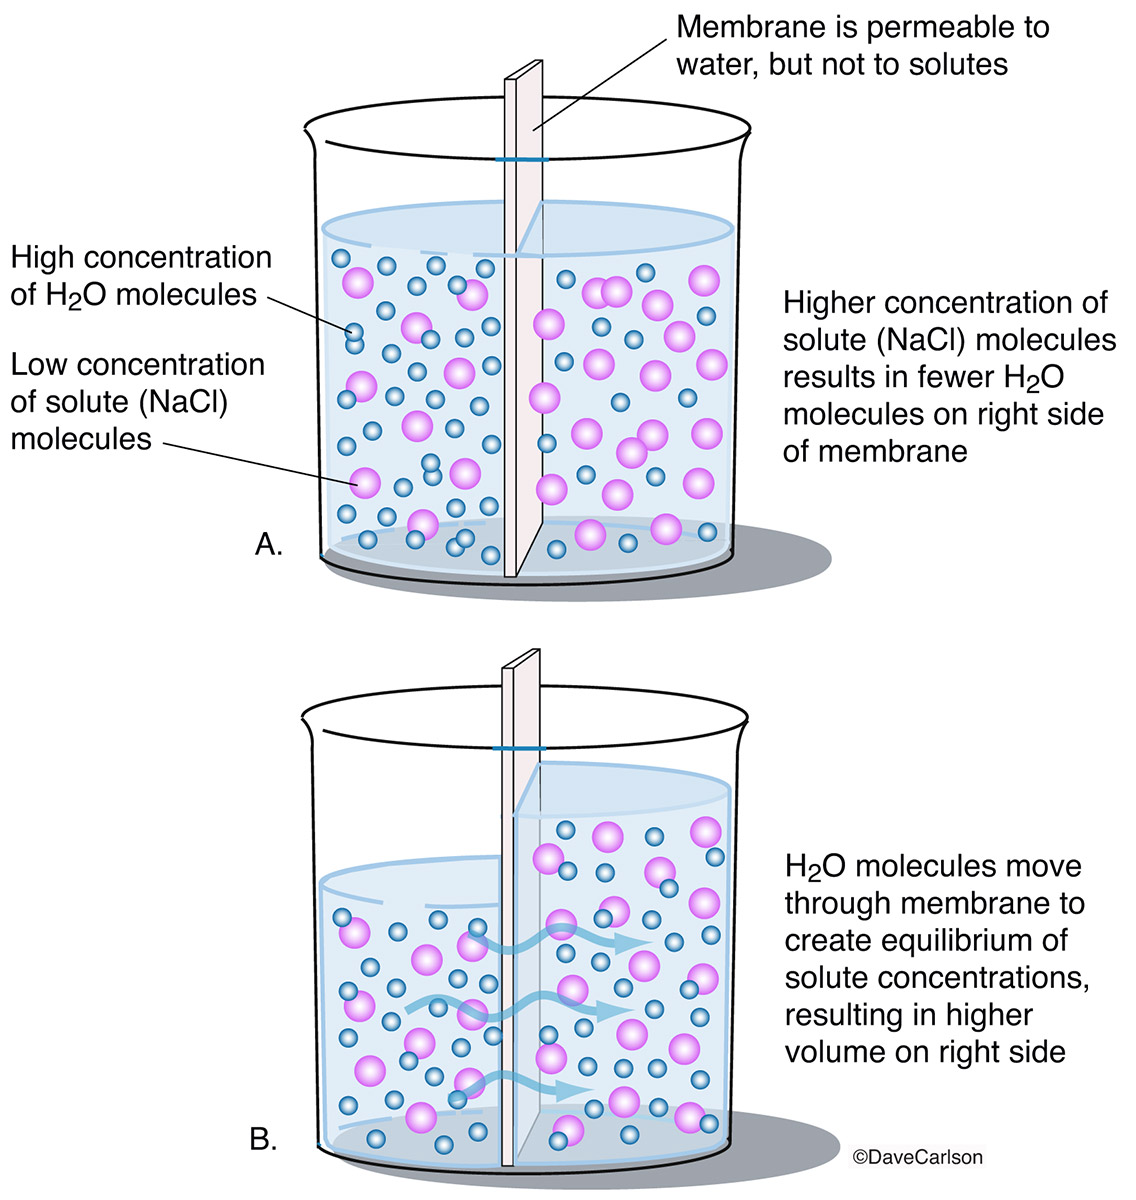 Illustration of osmosis, or osmotic pressure, by which higher concentrations of molecules of a solvent (water) can pass through...